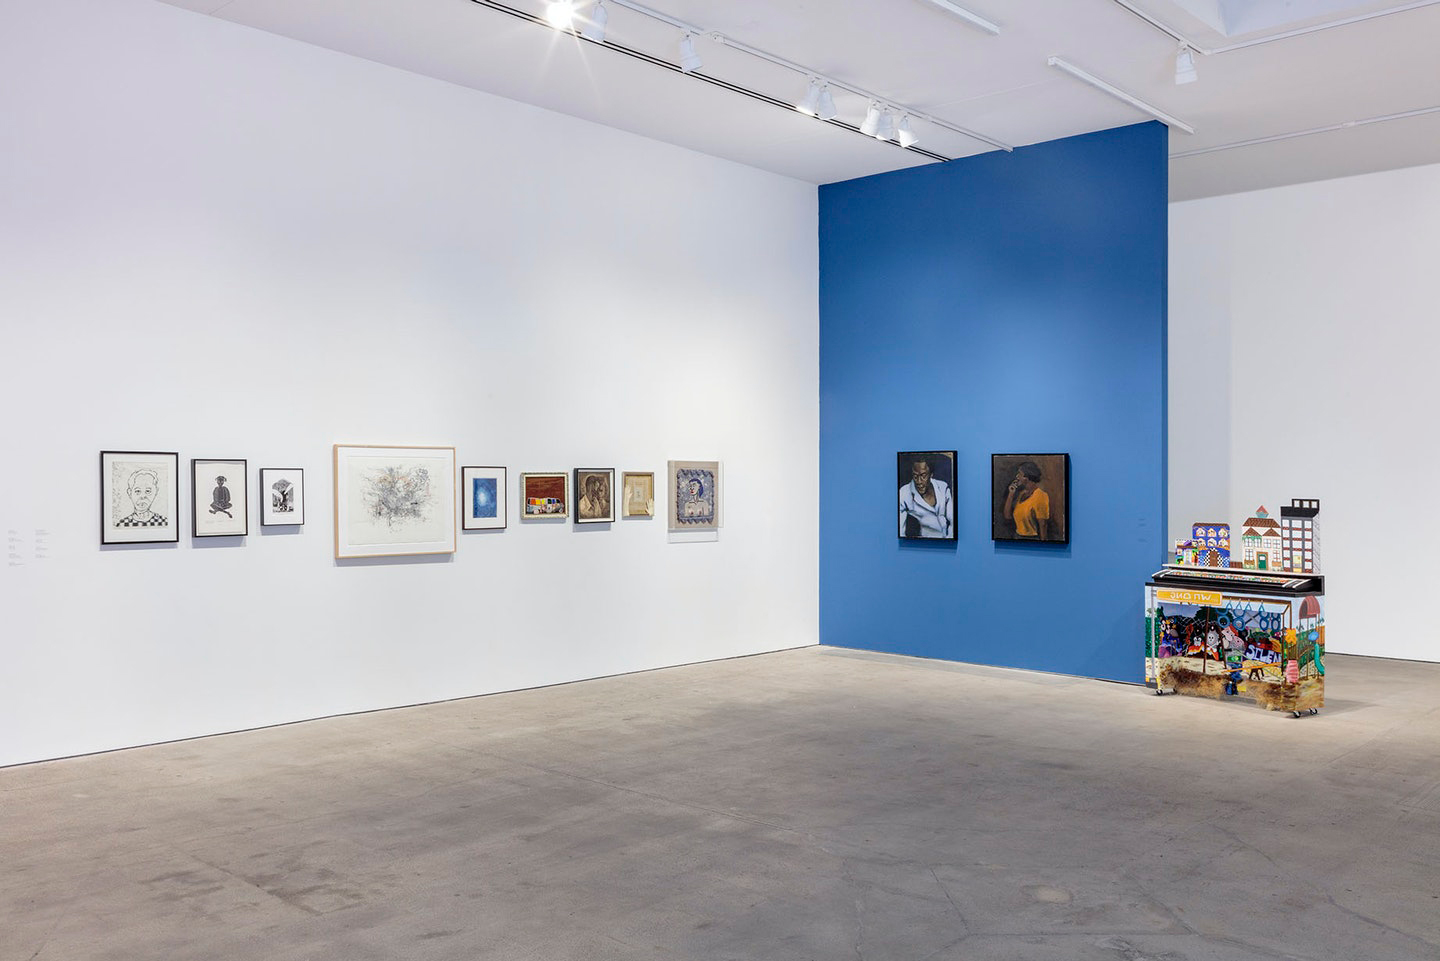 Installation view of Collective Constellation: Selections from The Eileen Harris Norton Collection at Art + Practice. 08 February 2020 - 02 January 2021. Photo: Charles White